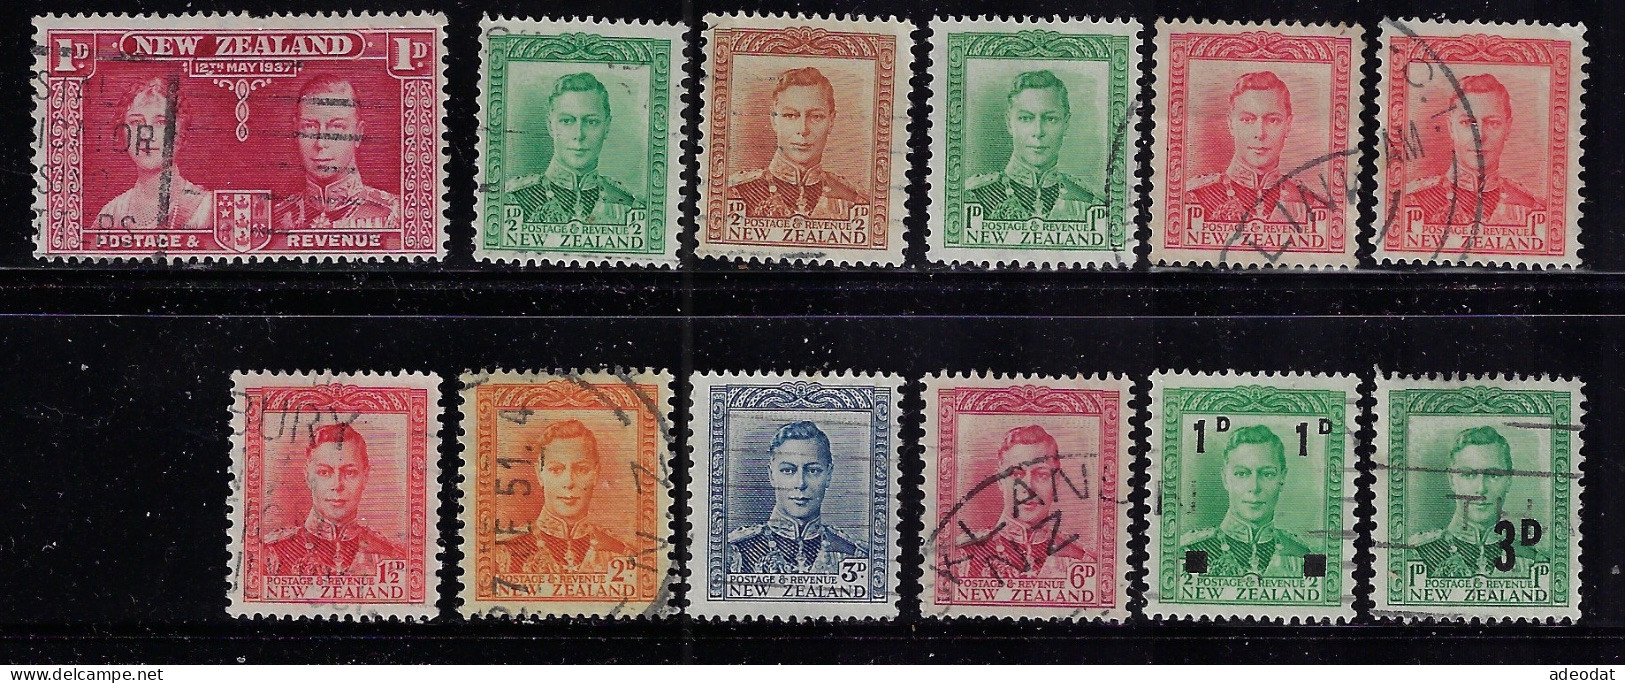 NEW ZEALAND 1937-41 QUEEN ELISABETH And KING GEORGE VI  SCOTT #223,226...228C ,USED - Usados